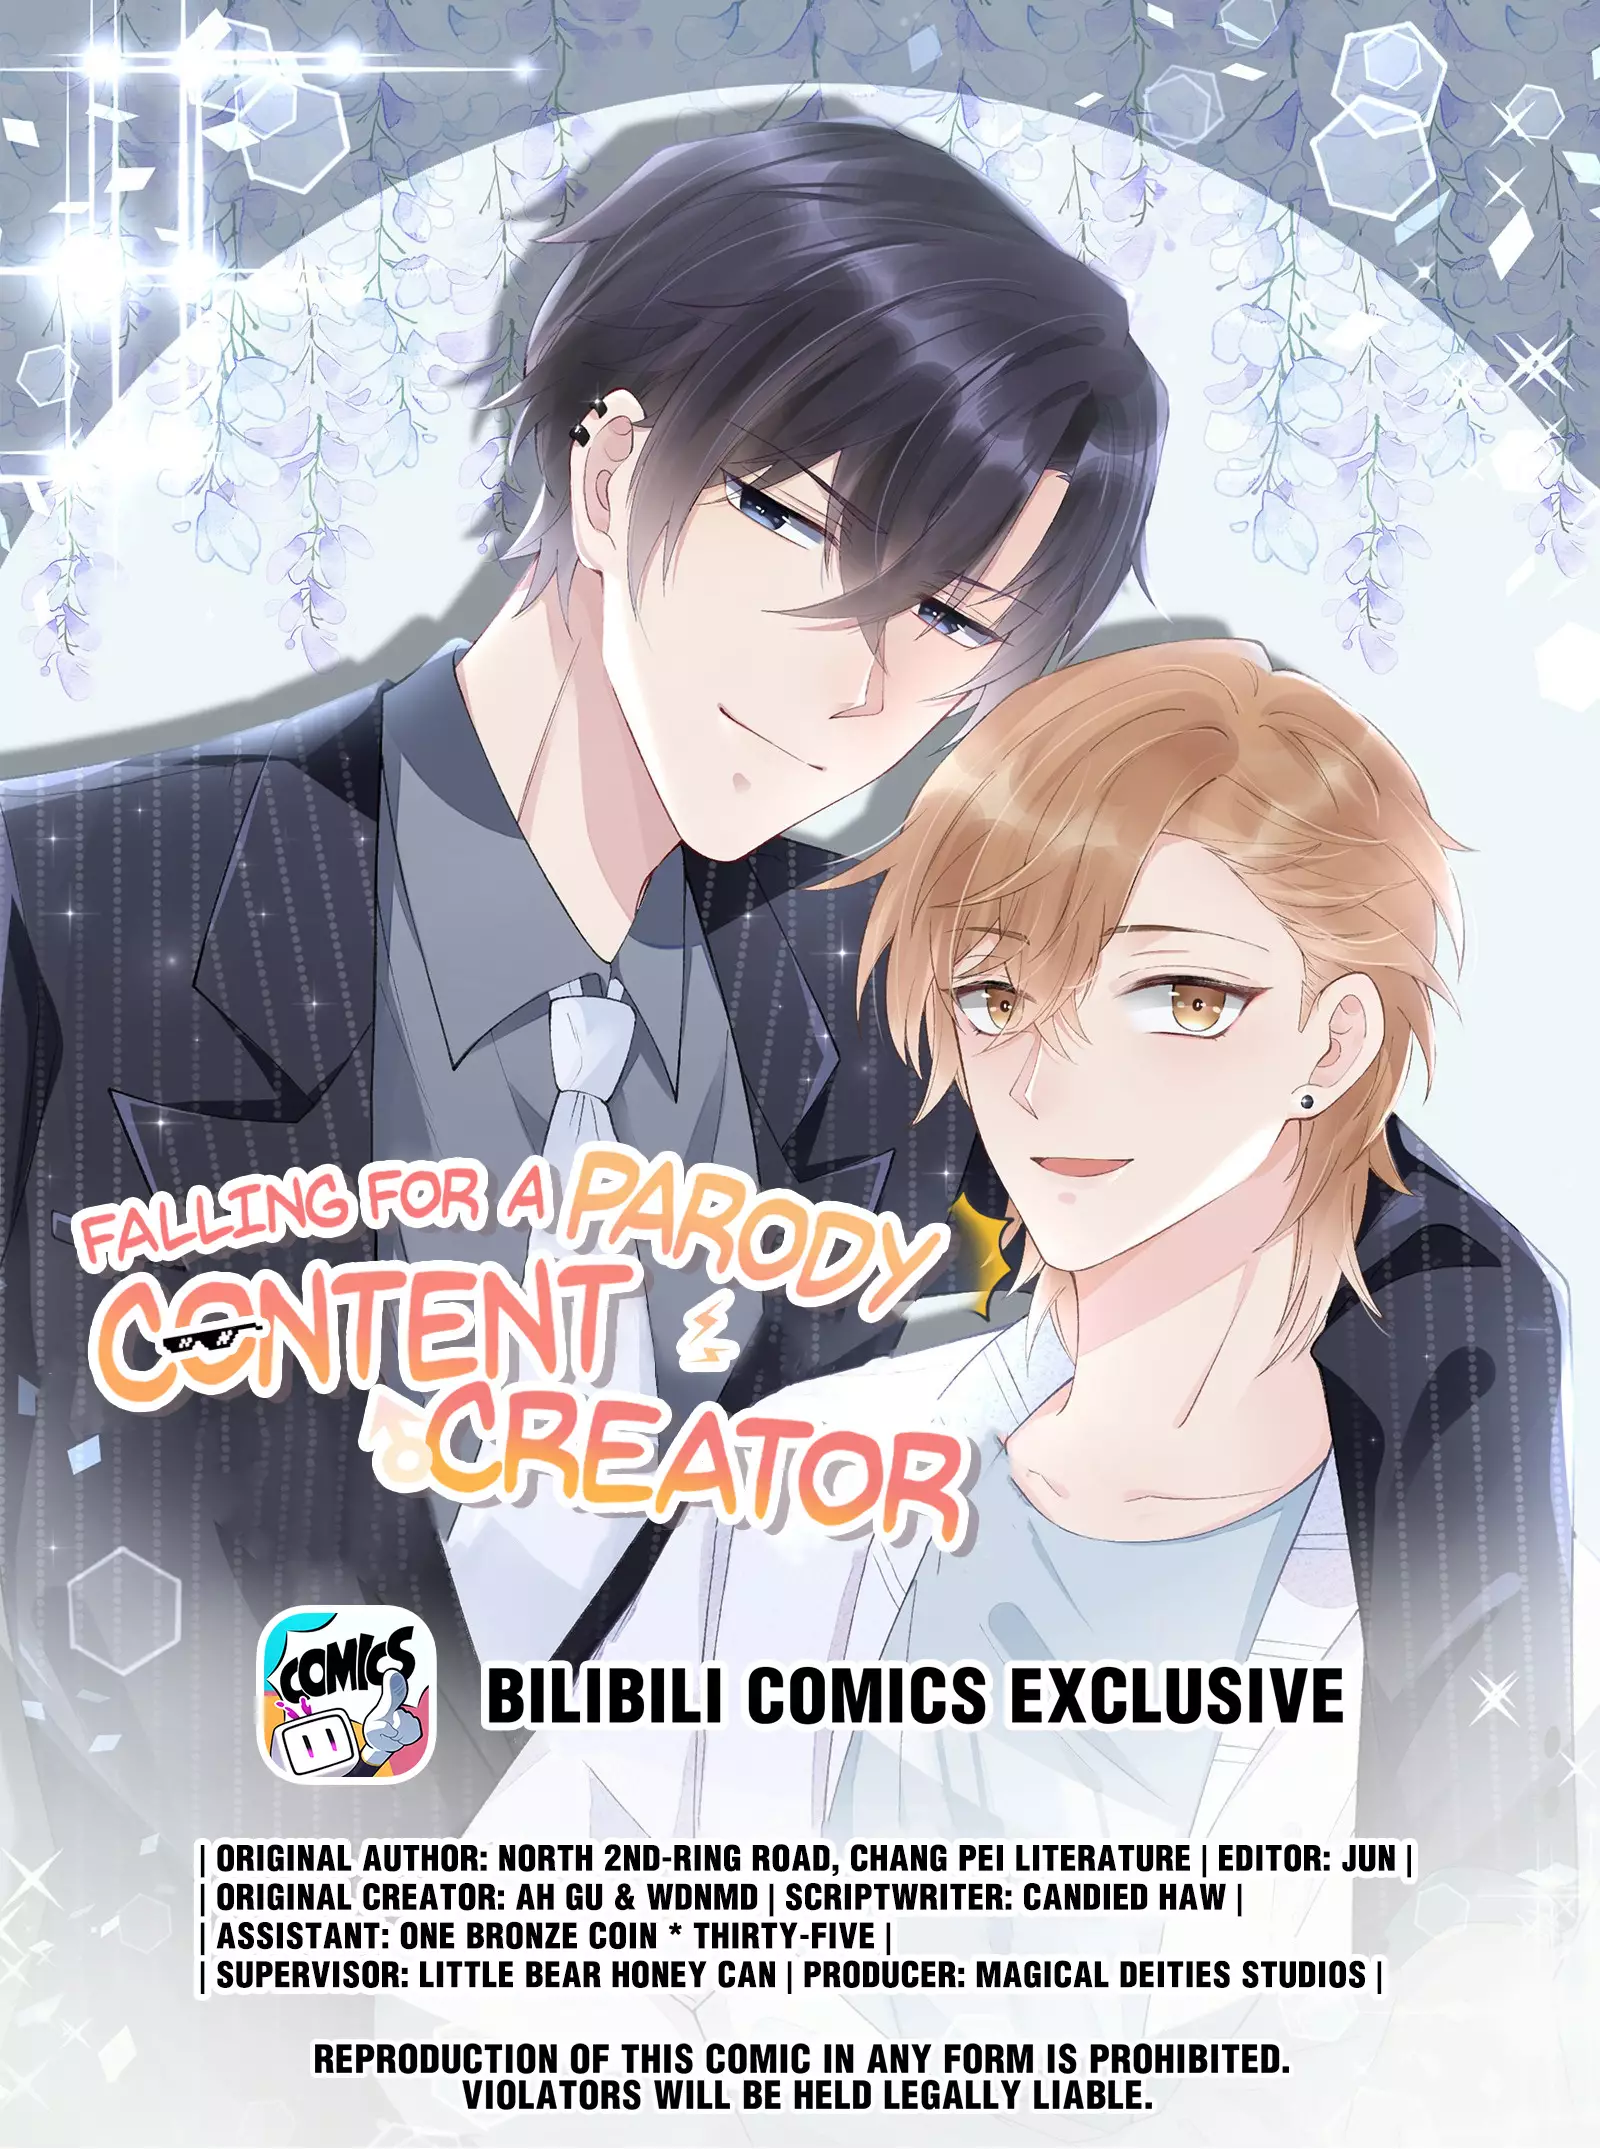 Falling For A Parody Content Creator - 16 page 1-1a4bbb0e